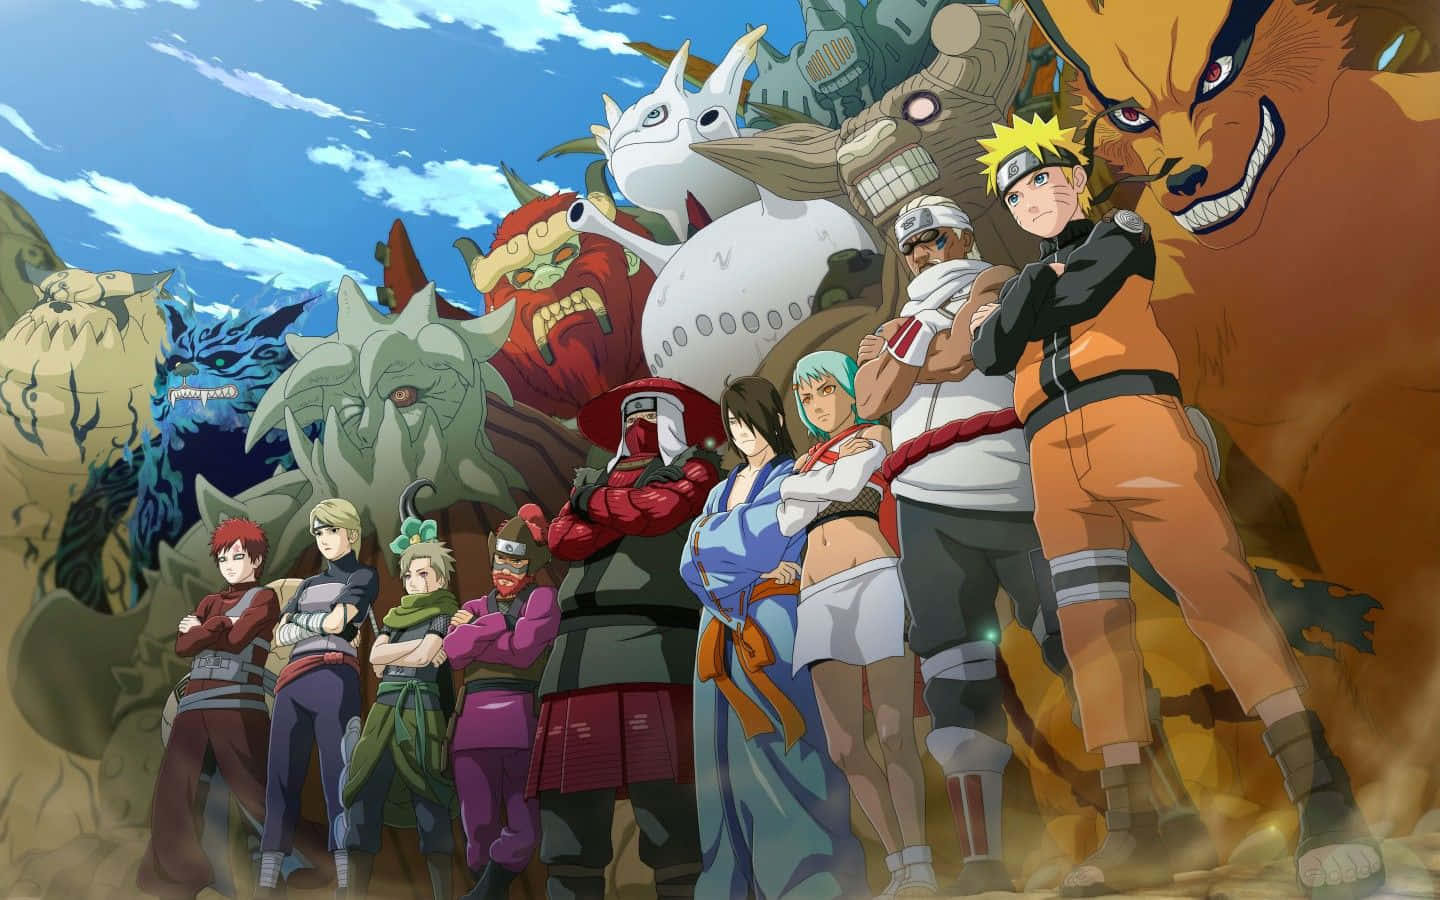 Spend your day with the hardworking and powerful Naruto Uzumaki! Wallpaper